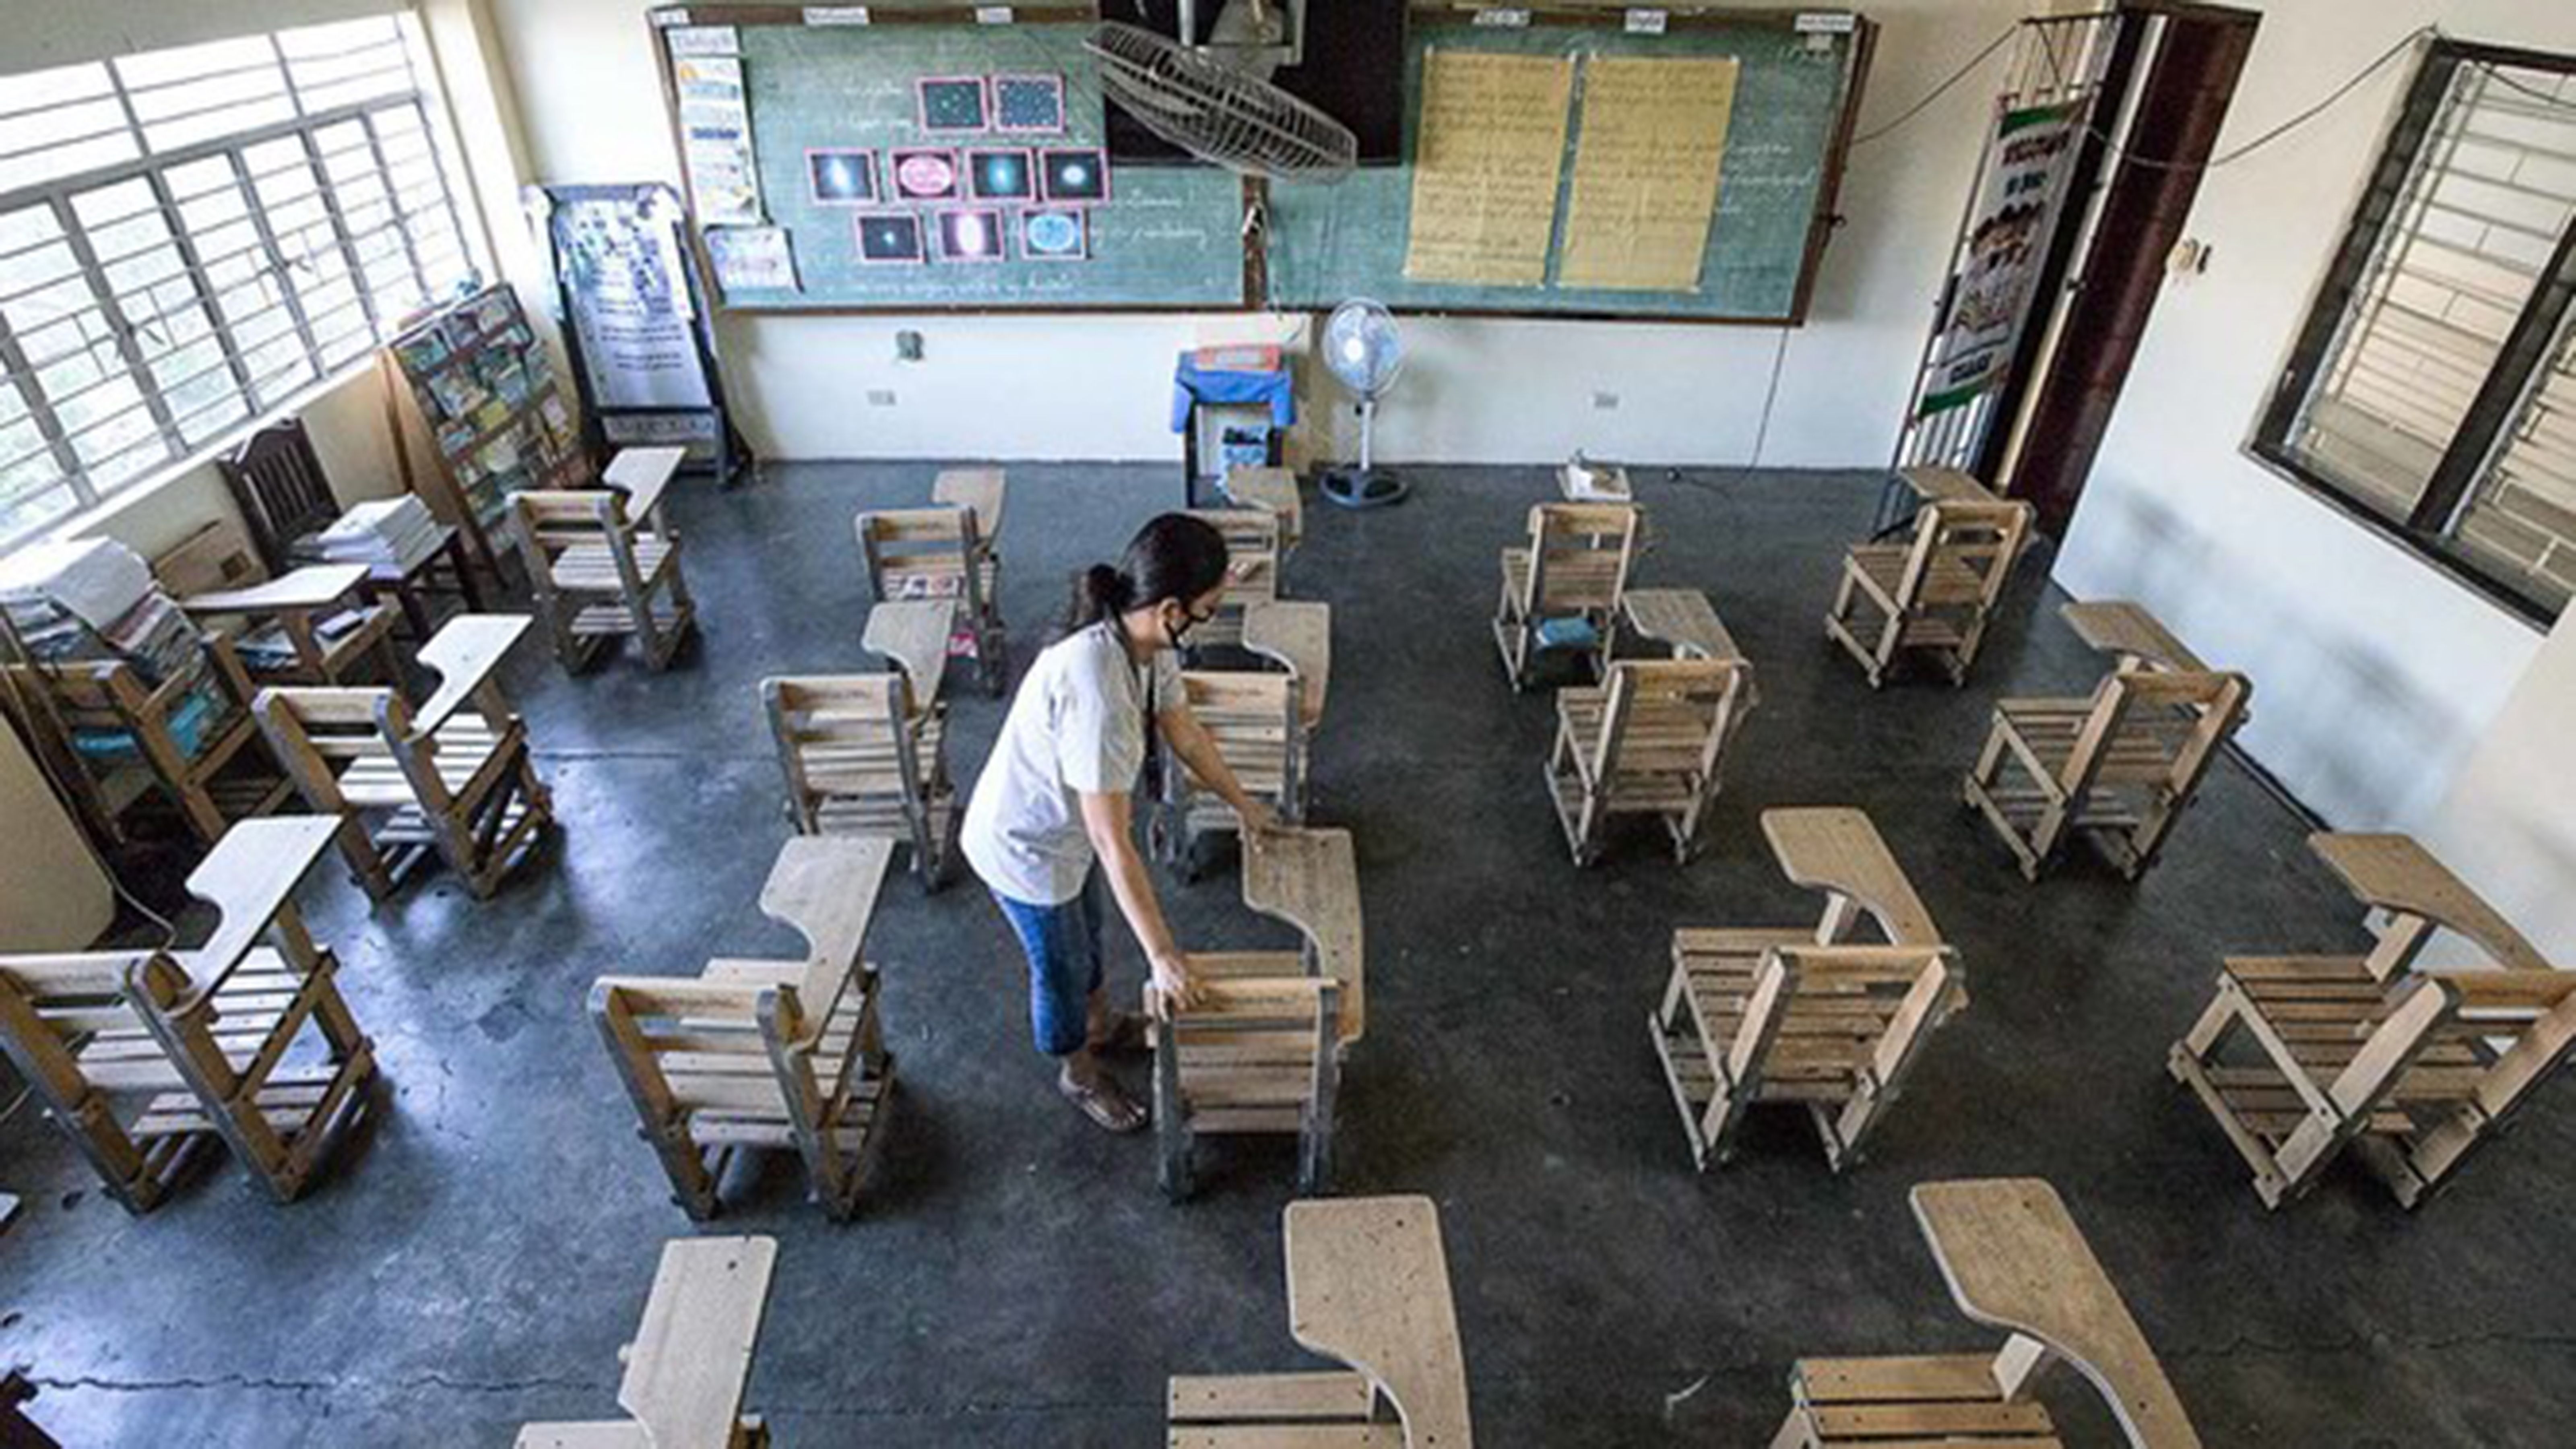 As ‘face-to-face’ classes still not an option; DepEd- Pagsanjan office turned into isolation facility